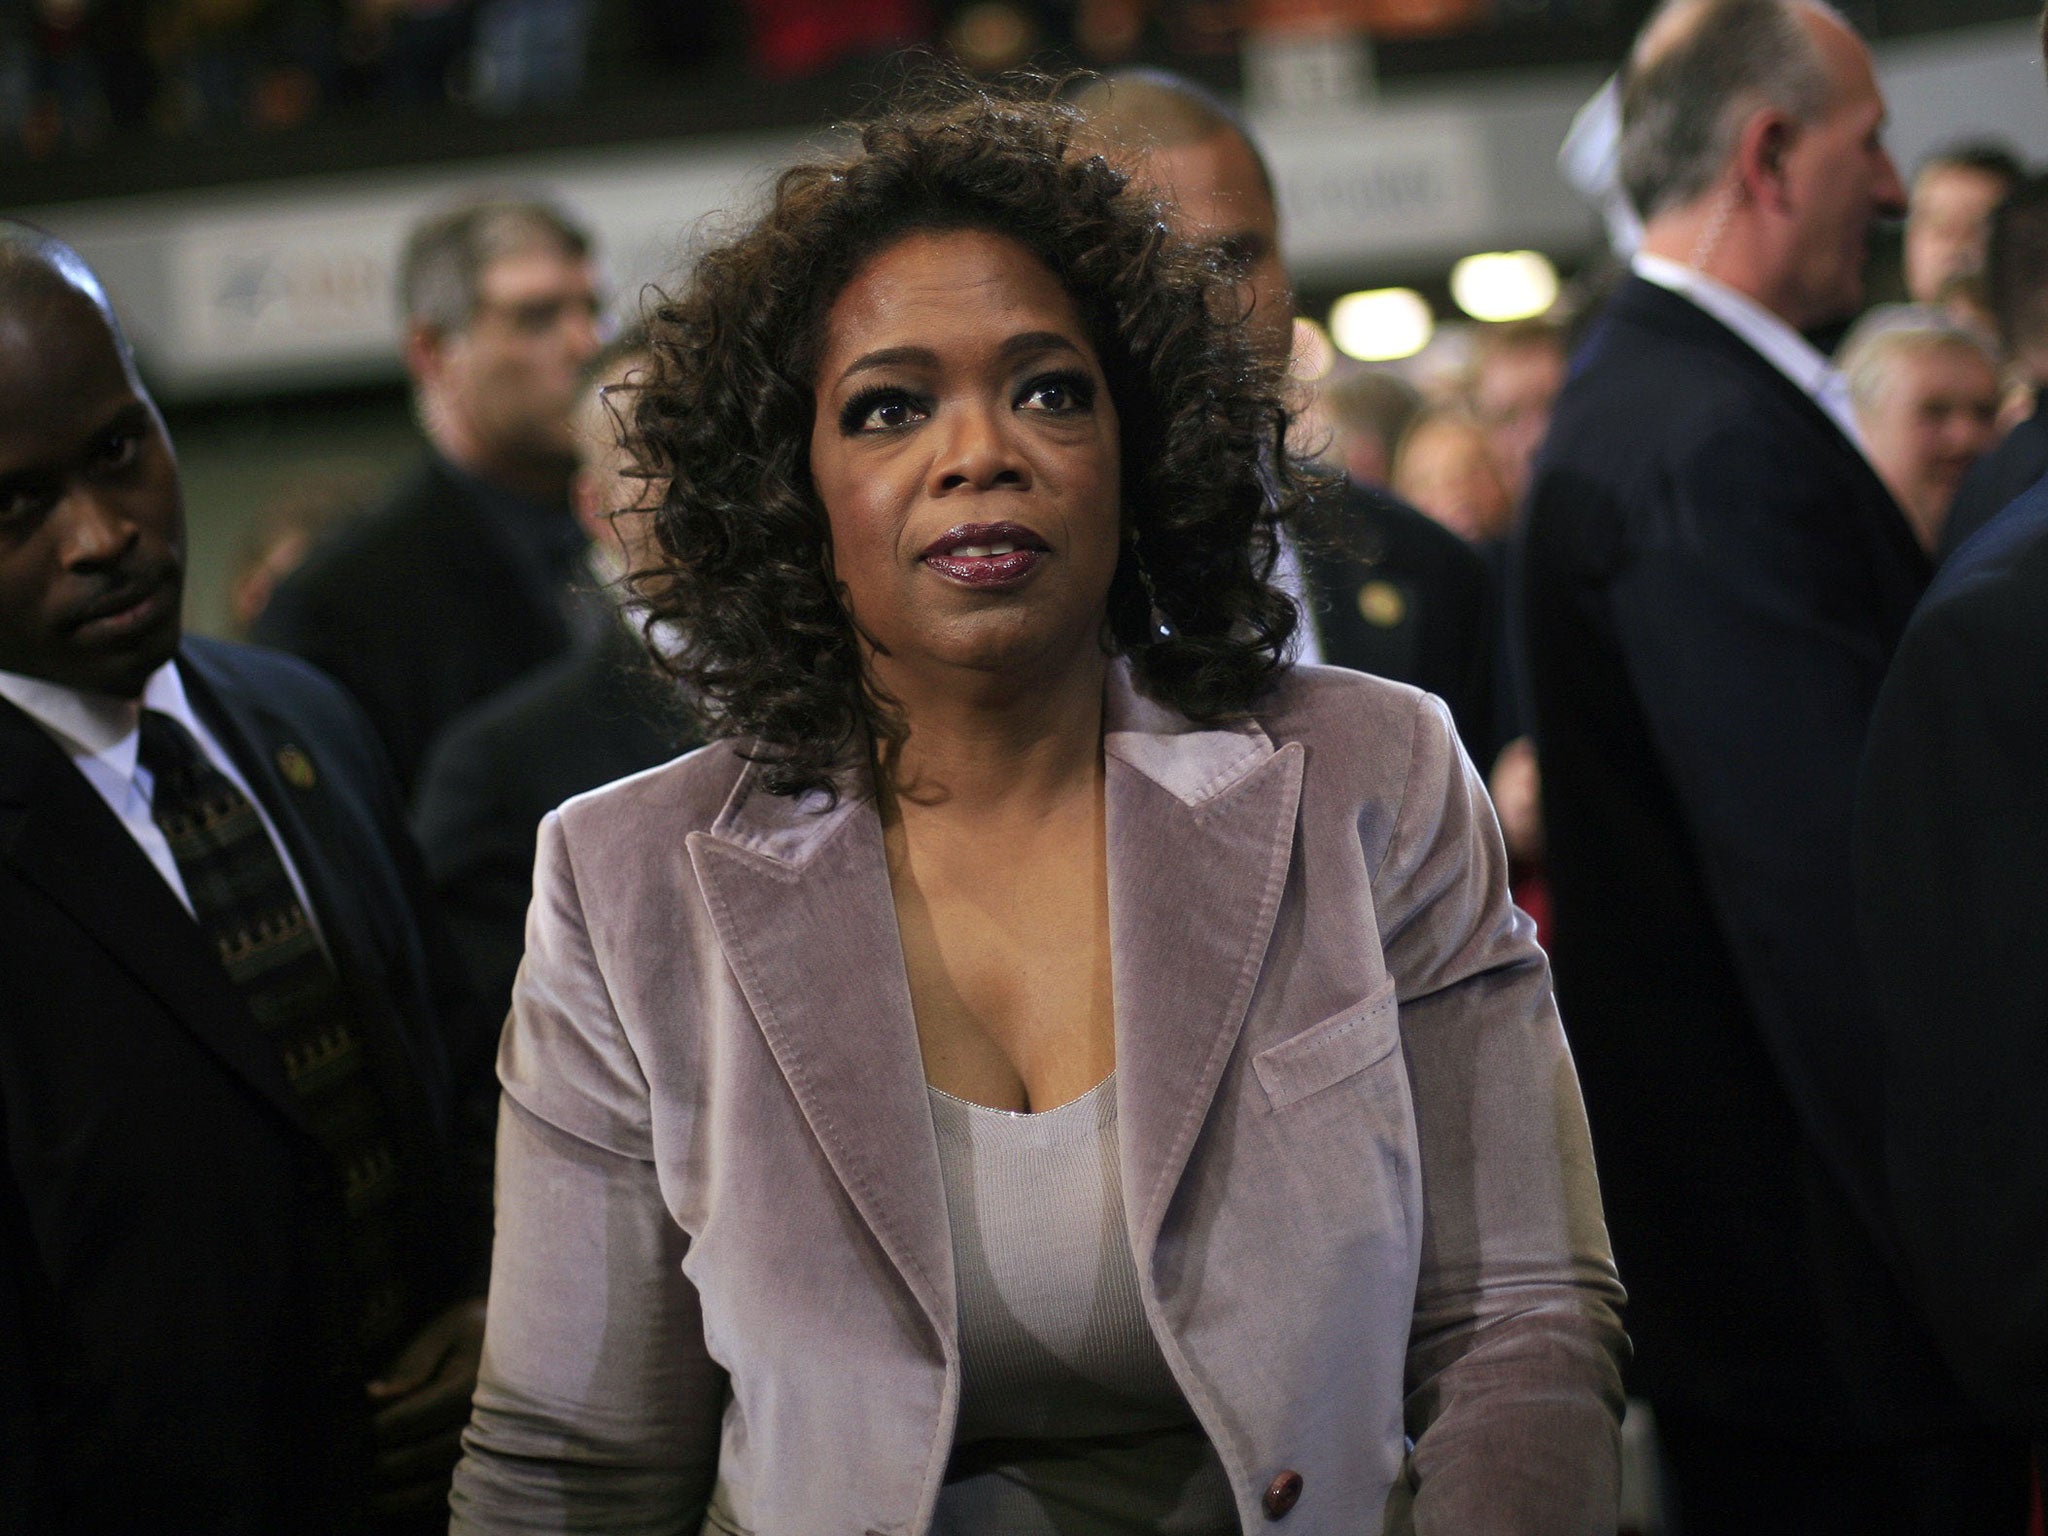 The Oprah effect: Winfrey, at a campaign rally in 2007, is said to have won the election for Obama